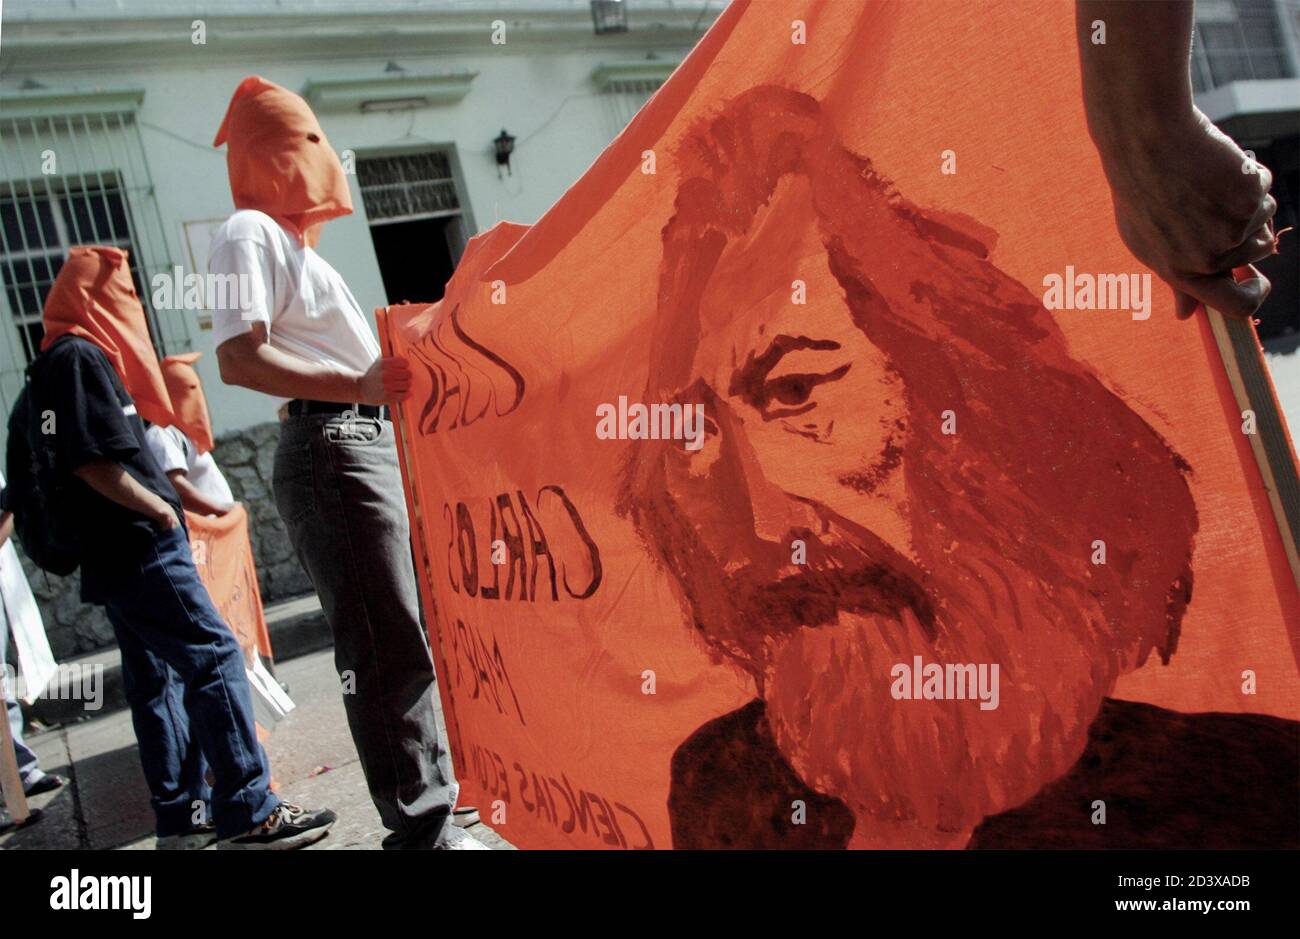 Students from the University of San Carlos carry a painted image of Karl Marx during the annual 'Huelga de los Dolores' parade April 2, 2004 in Guatemala City. The event, a tradition for 106 years, is now used by the students as a chance to air their grievances against the government. REUTERS/Daniel LeClair  DNL Stock Photo